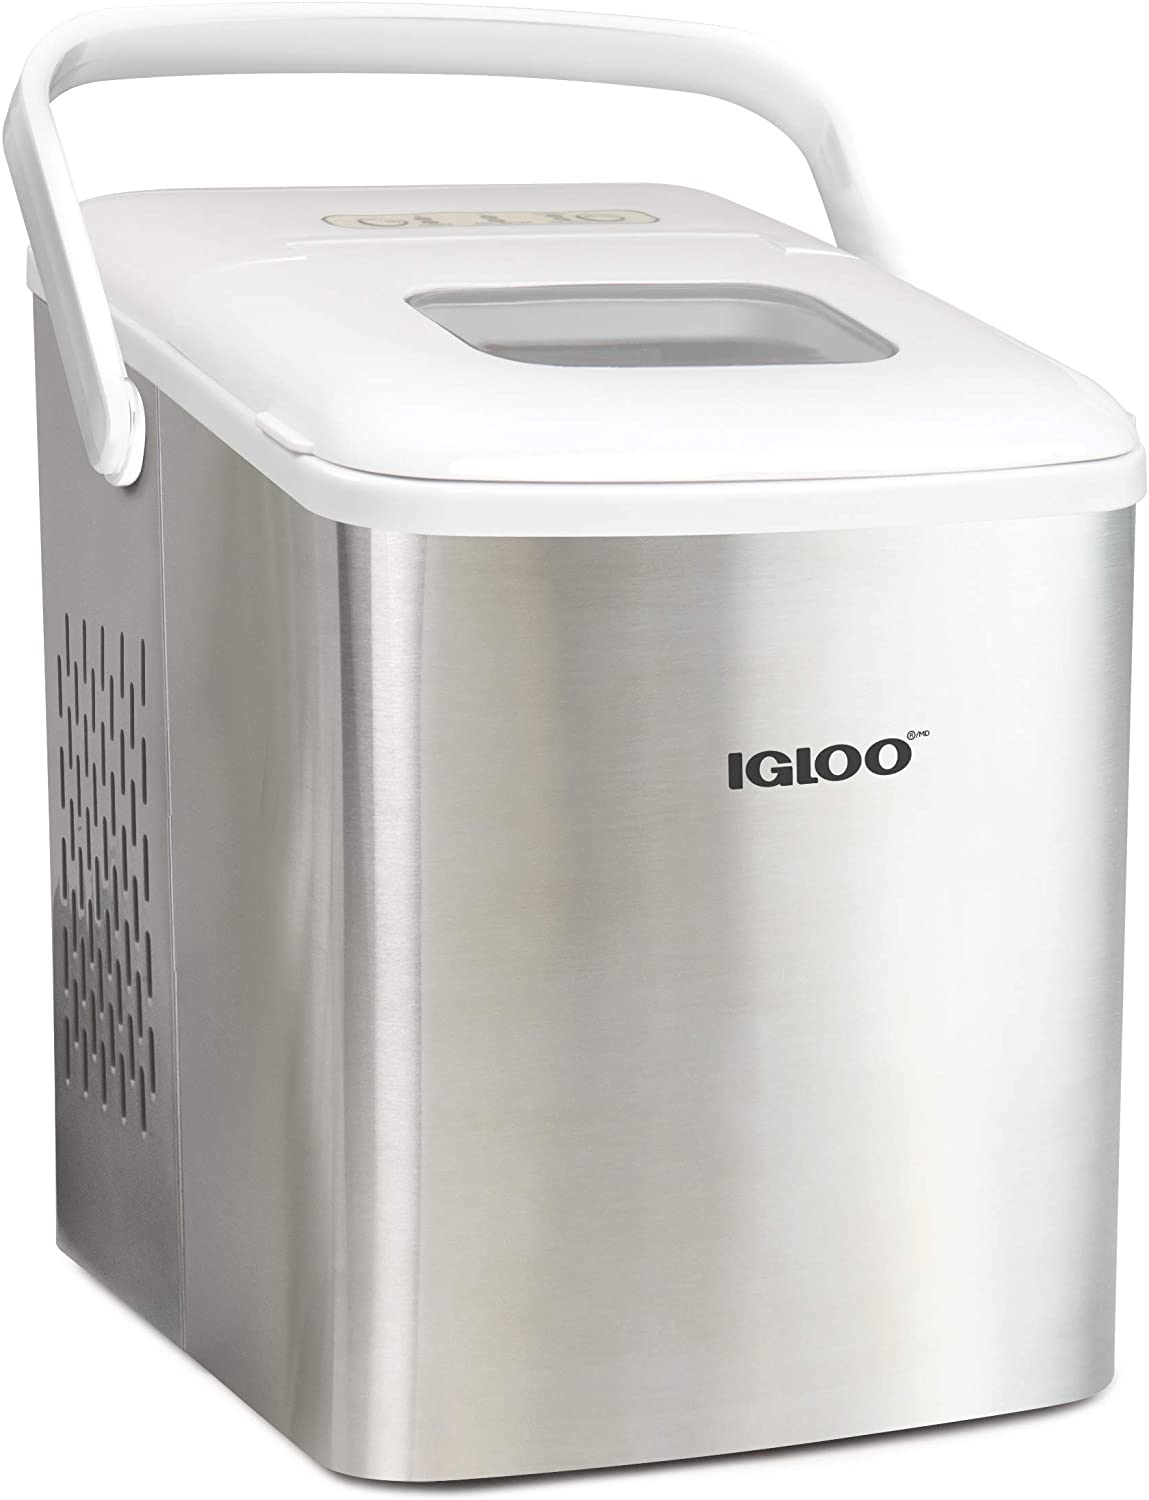 Igloo Self-Cleaning Countertop Ice Maker